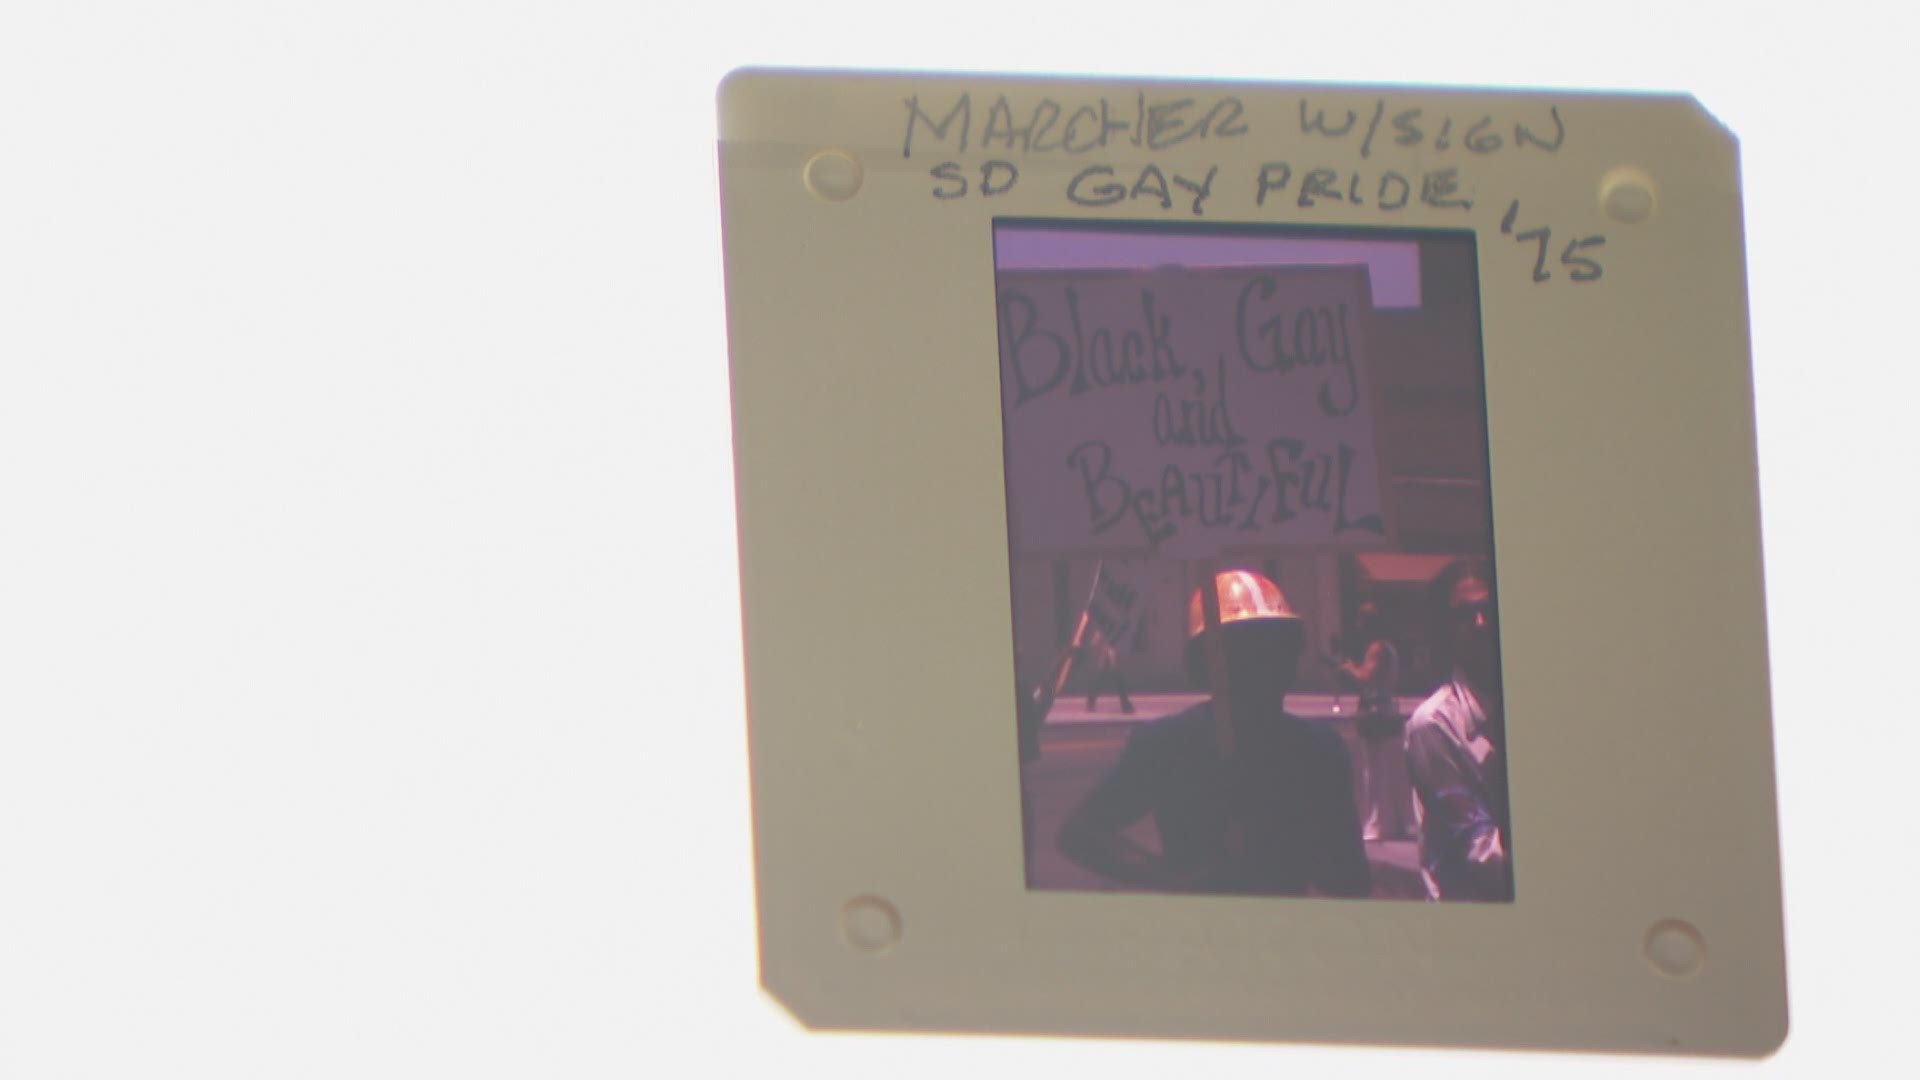 As we count down to Pride weekend in San Diego, News 8 is also taking a look back. It has been 50 years since the Stonewall Riots making this year's Pride especially significant. News 8's Tim Blodgett shows us the history of Pride in San Diego.